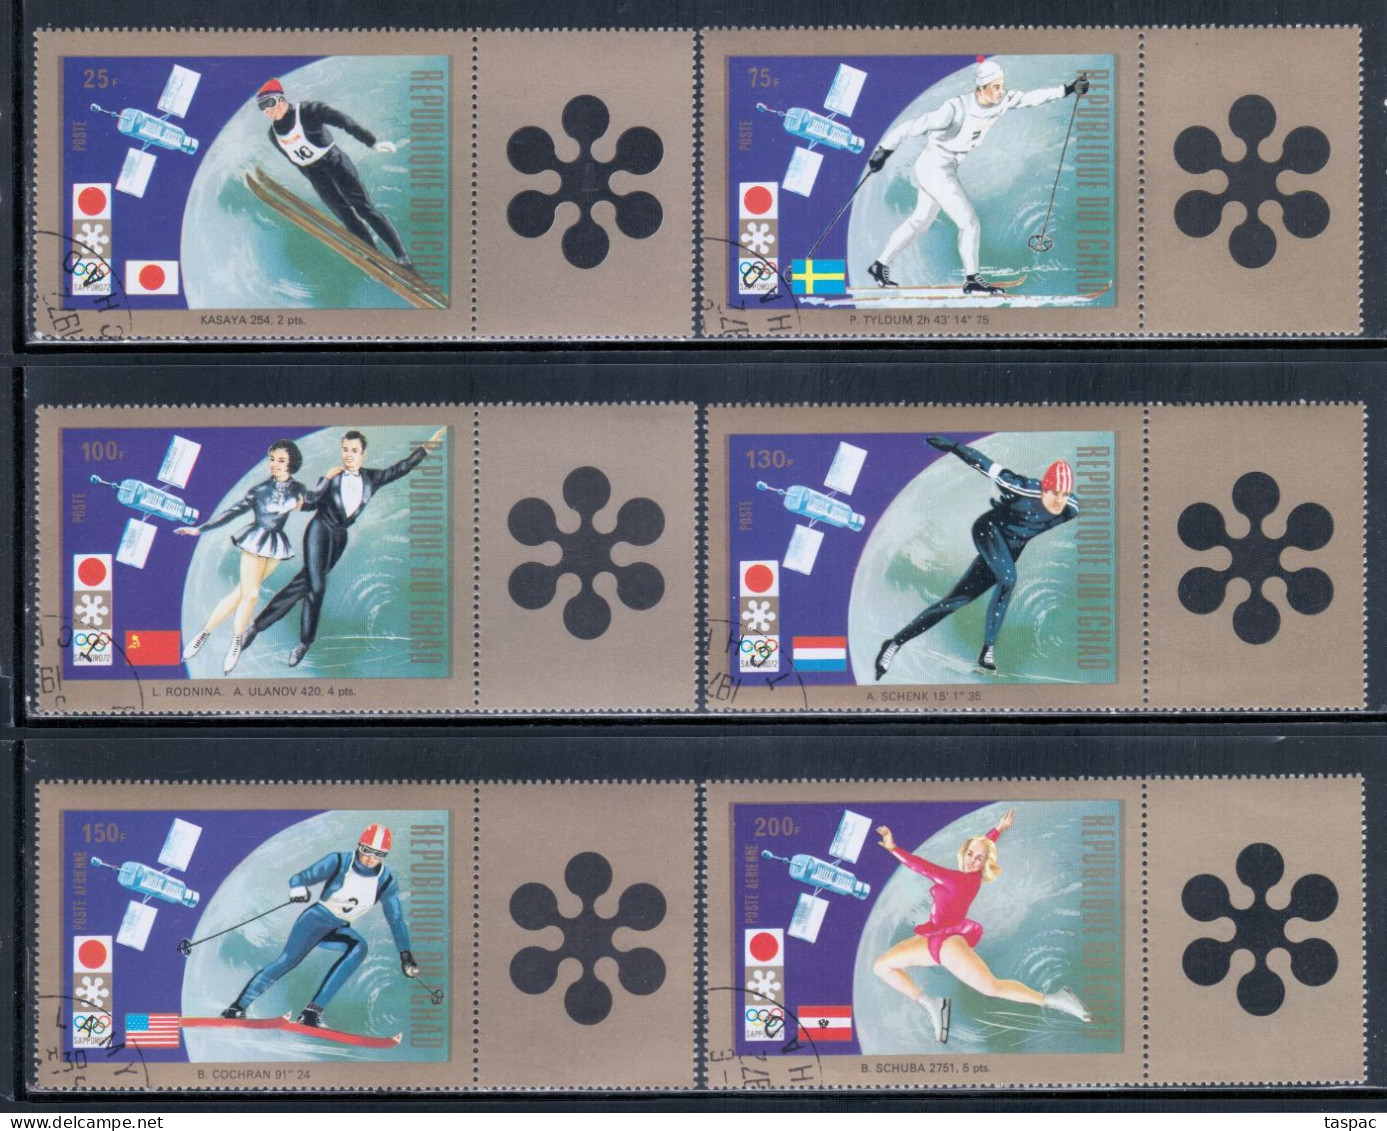 Chad 1972 Mi# 557-562 A Zf Used - Gold Medalists At The Sapporo Winter Olympics / Space - Ciad (1960-...)